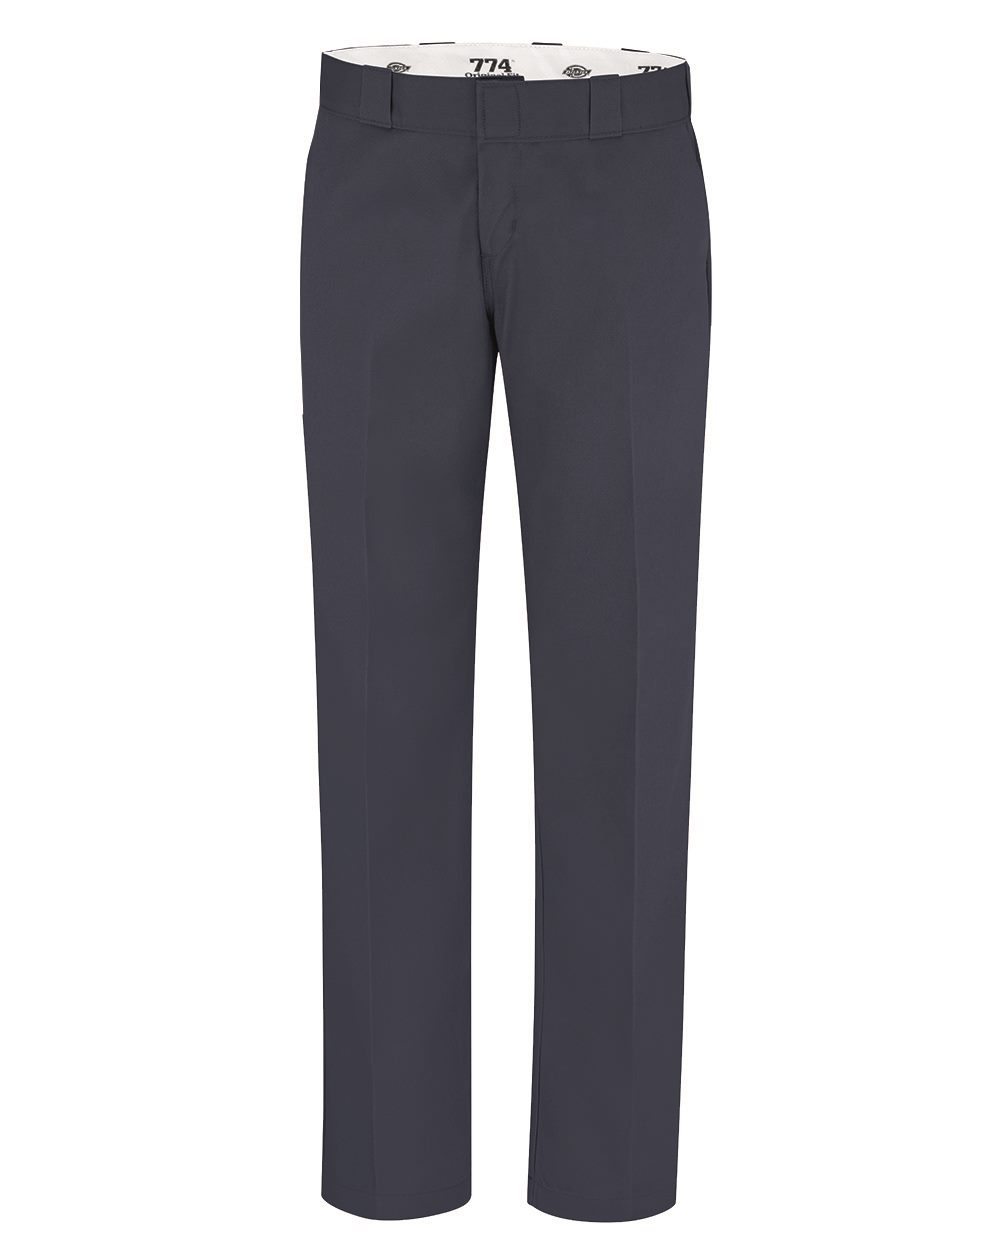 Dickies FP74EXT - Women's Work Pants - Extended Sizes